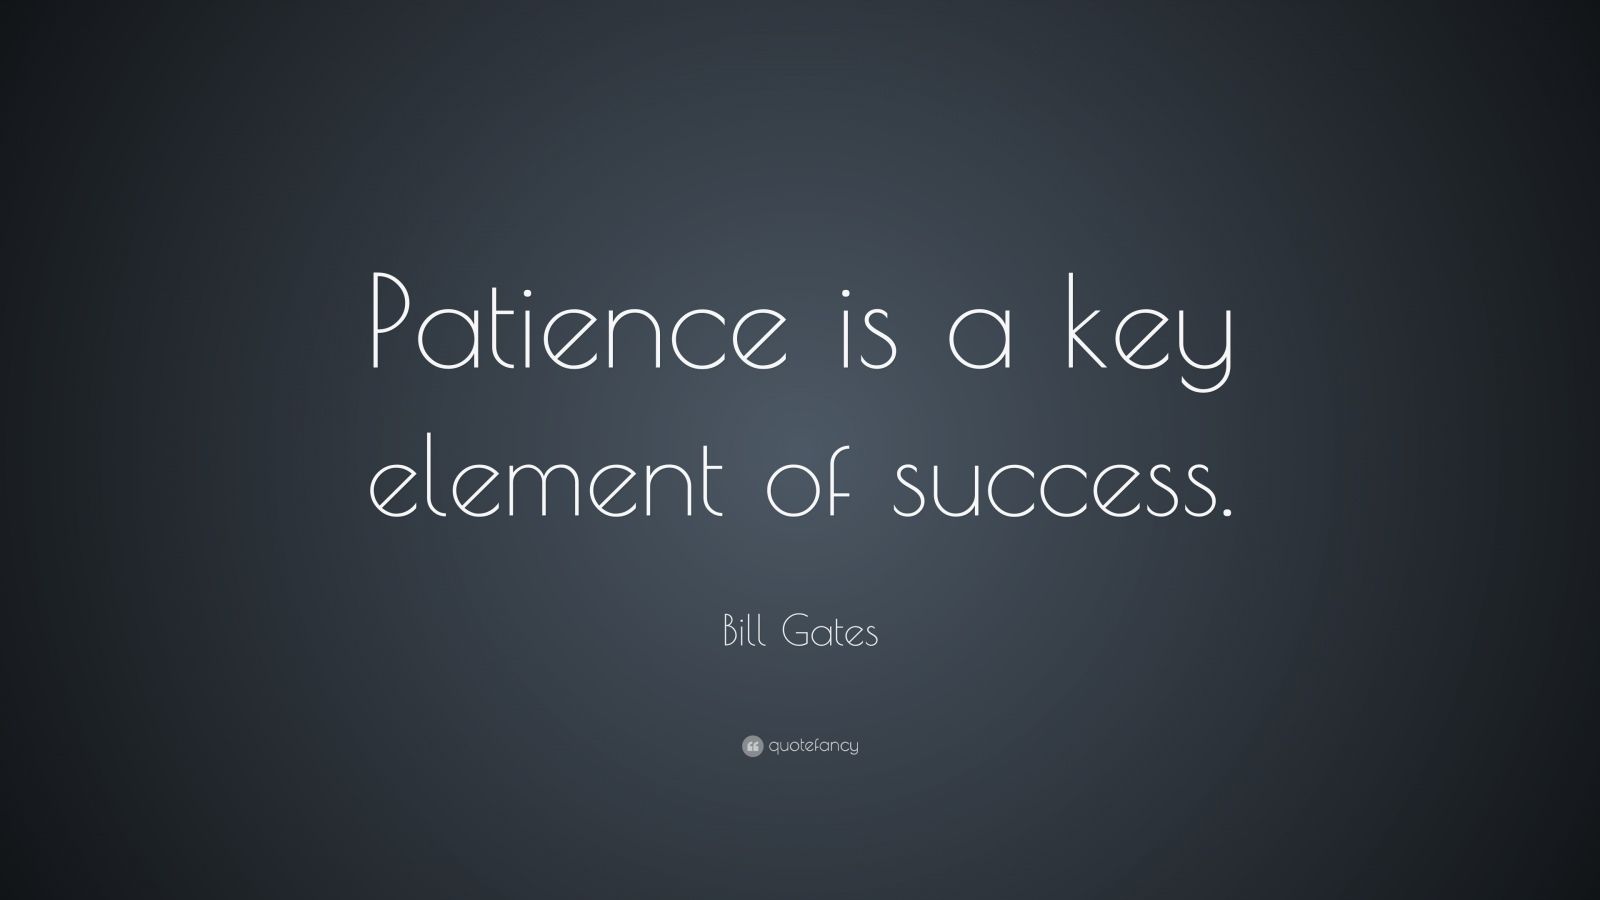 Bill Gates Quote: “Patience is a key element of success.” (40 ...